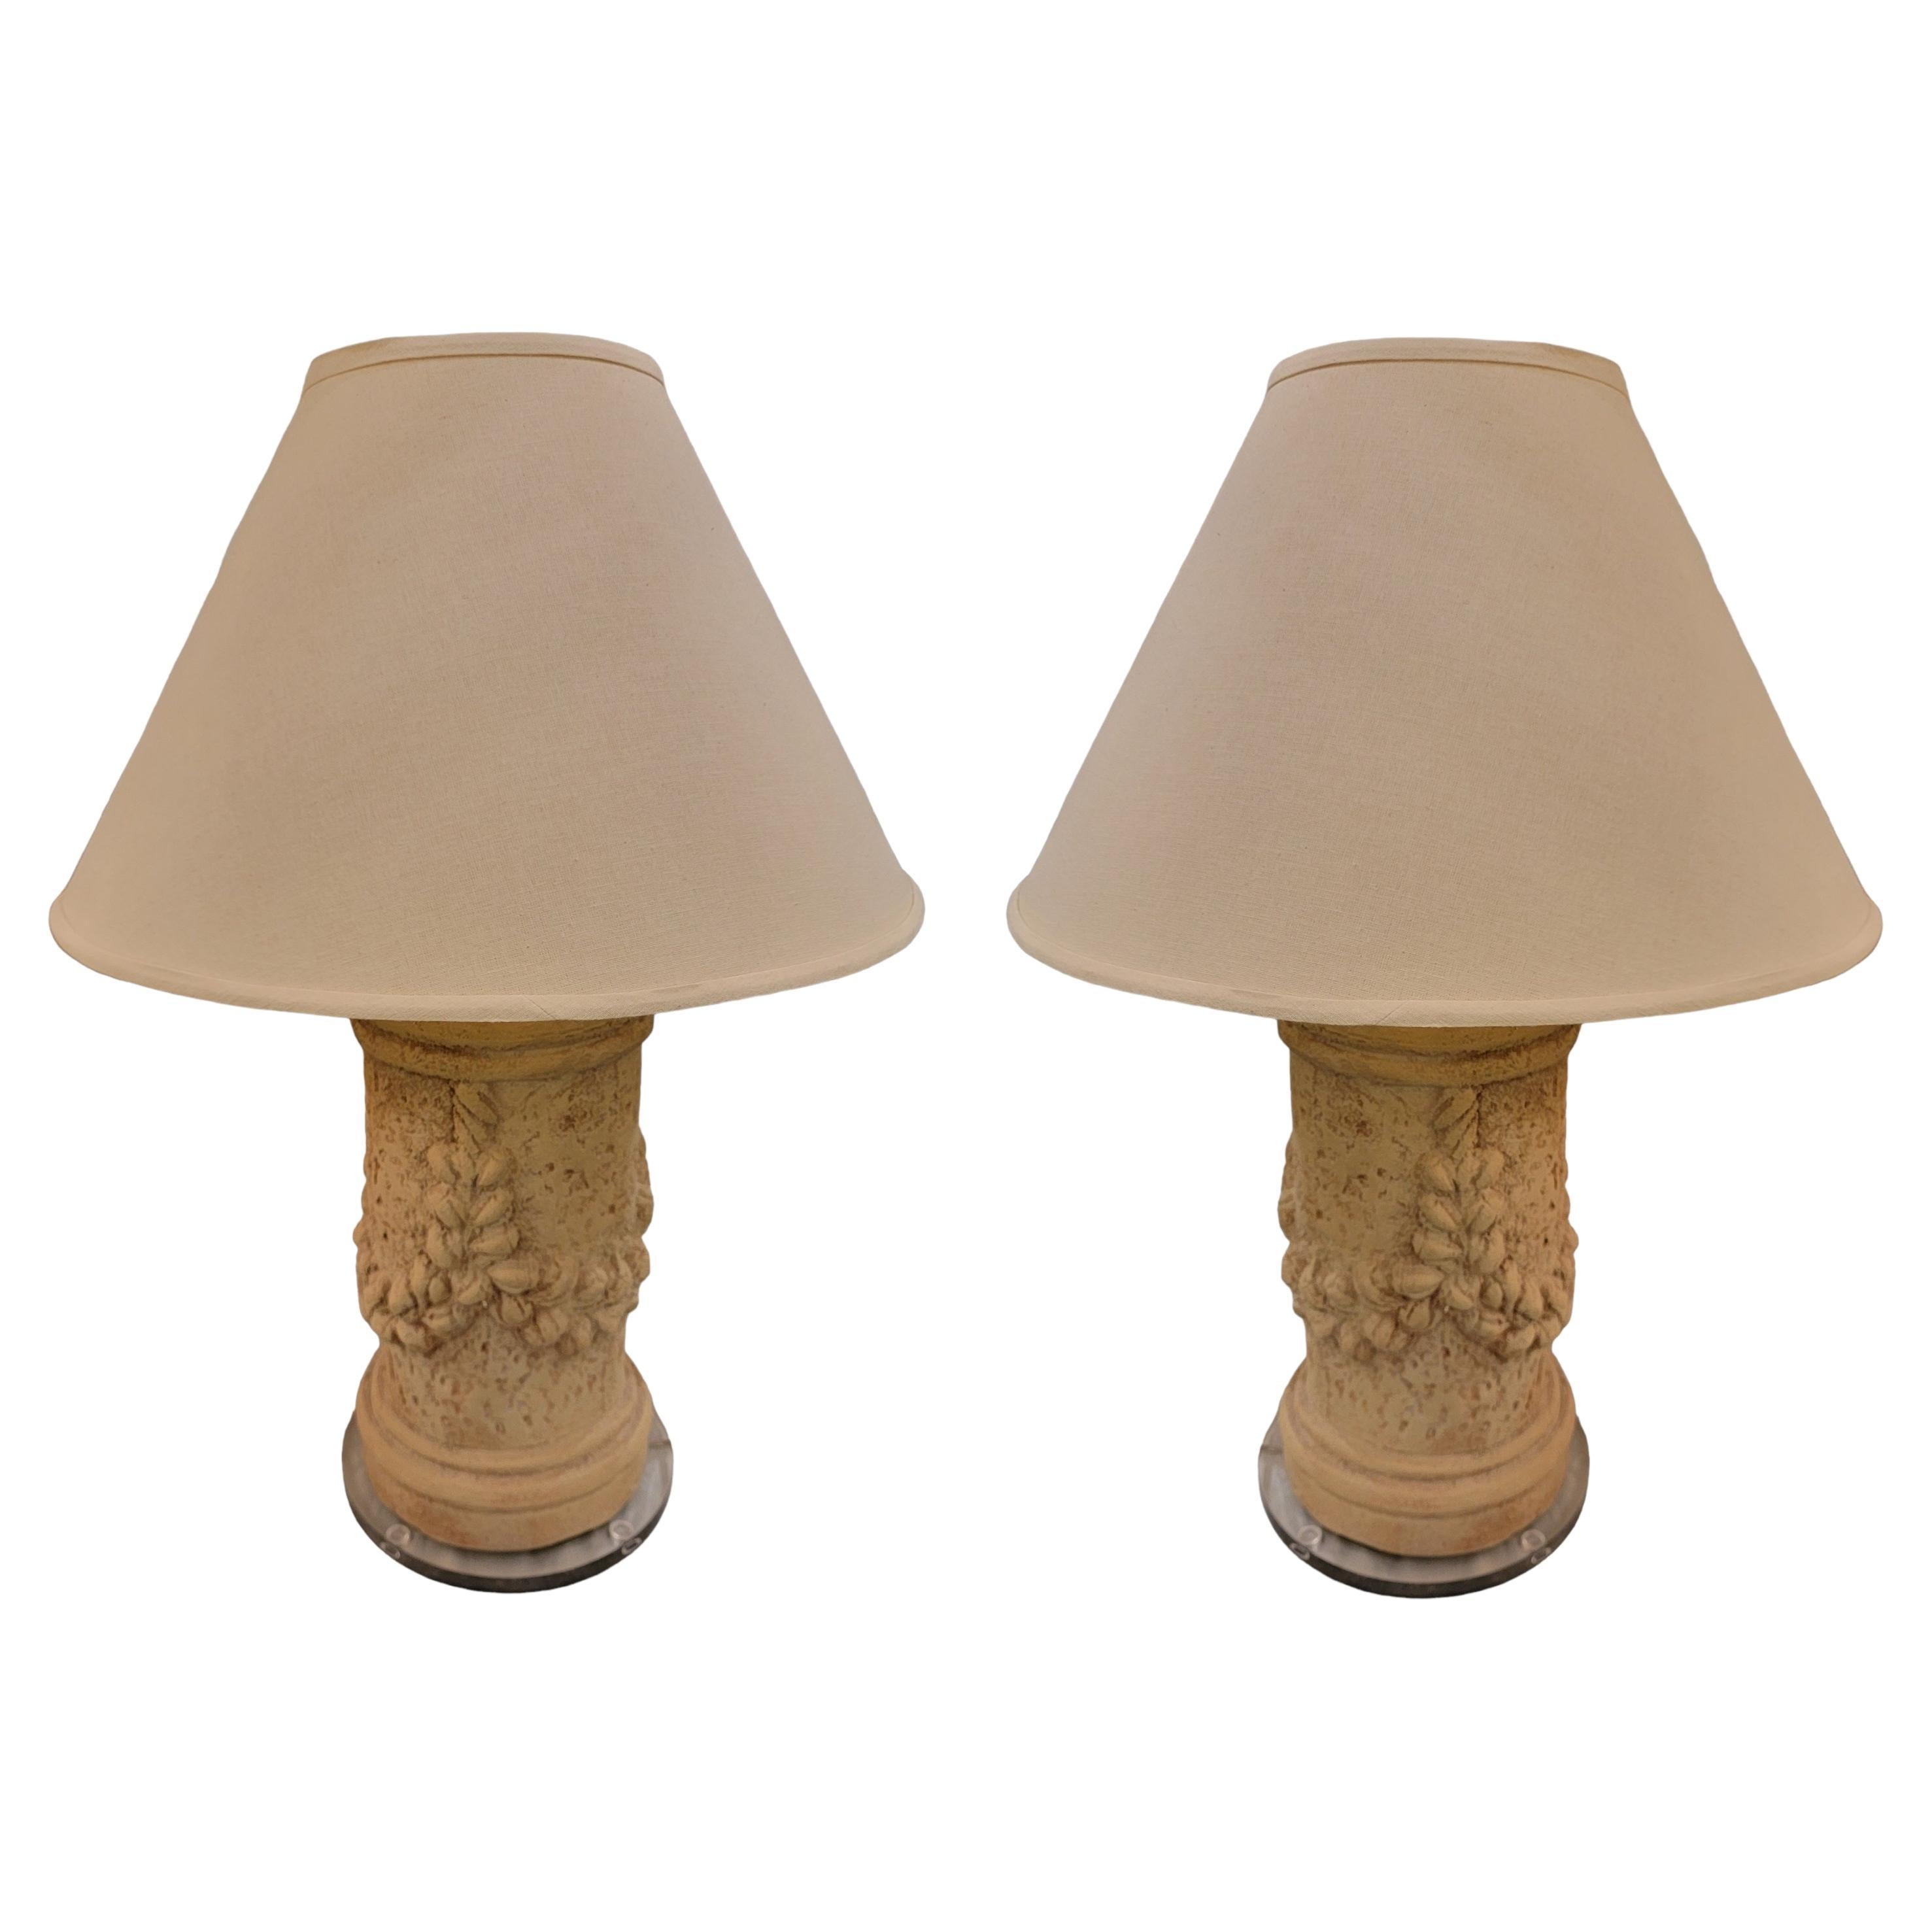 80s Porcelain Lucite Base Table Lamps with Linen Shades, a Pair